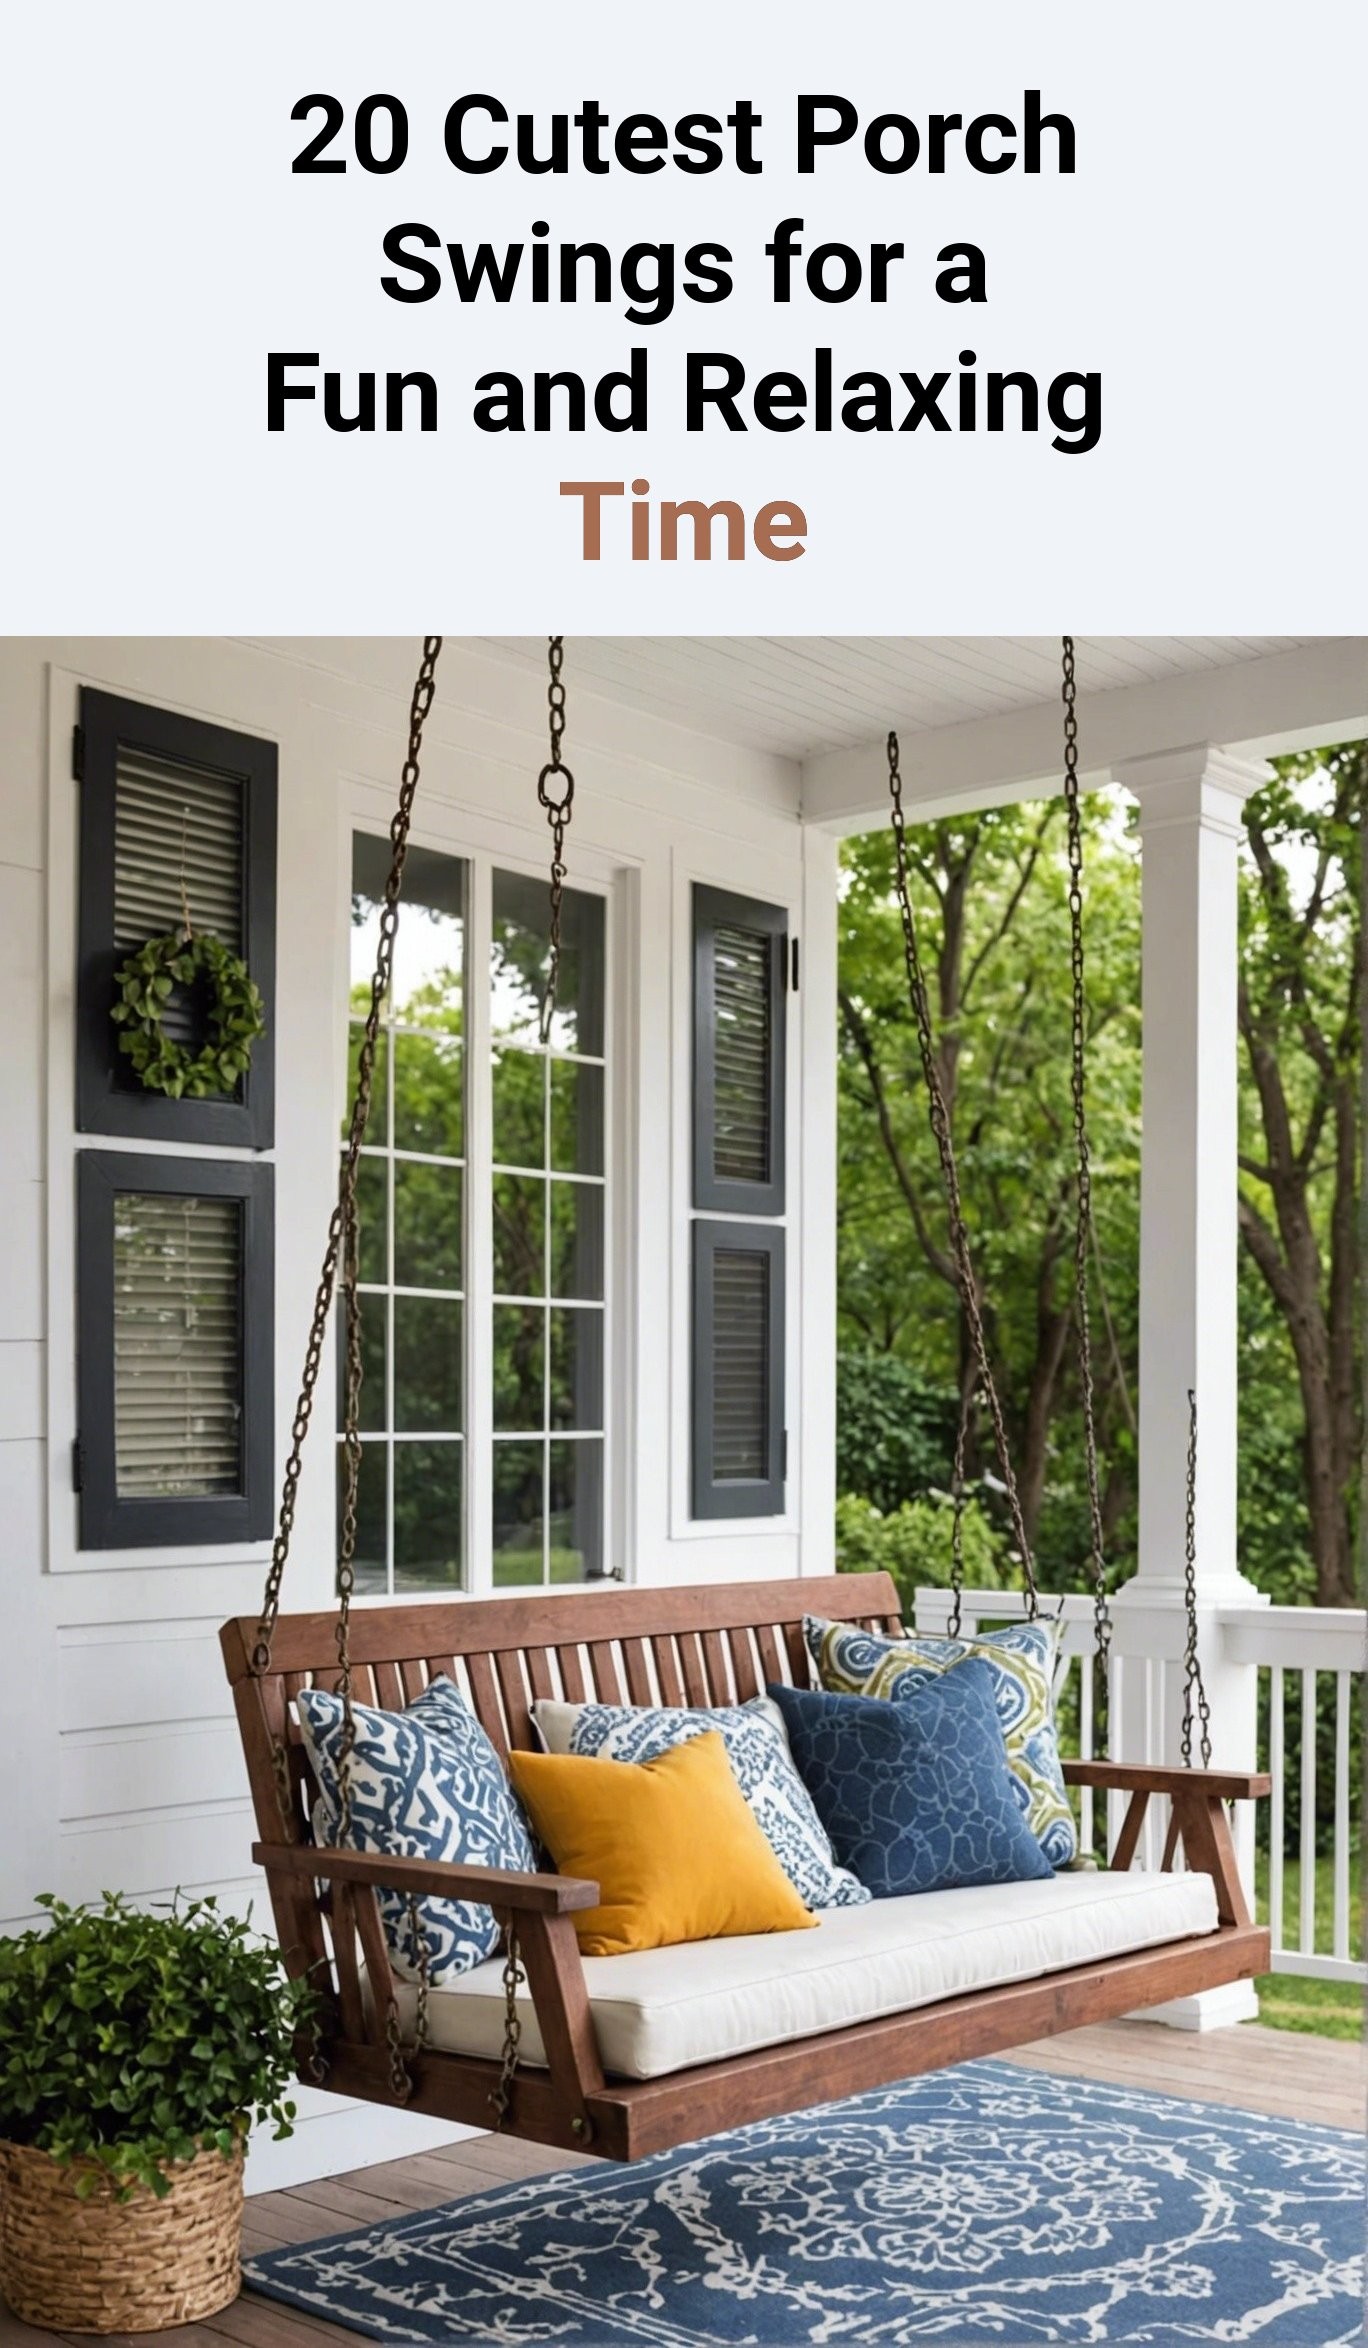 20 Cutest Porch Swings for a Fun and Relaxing Time